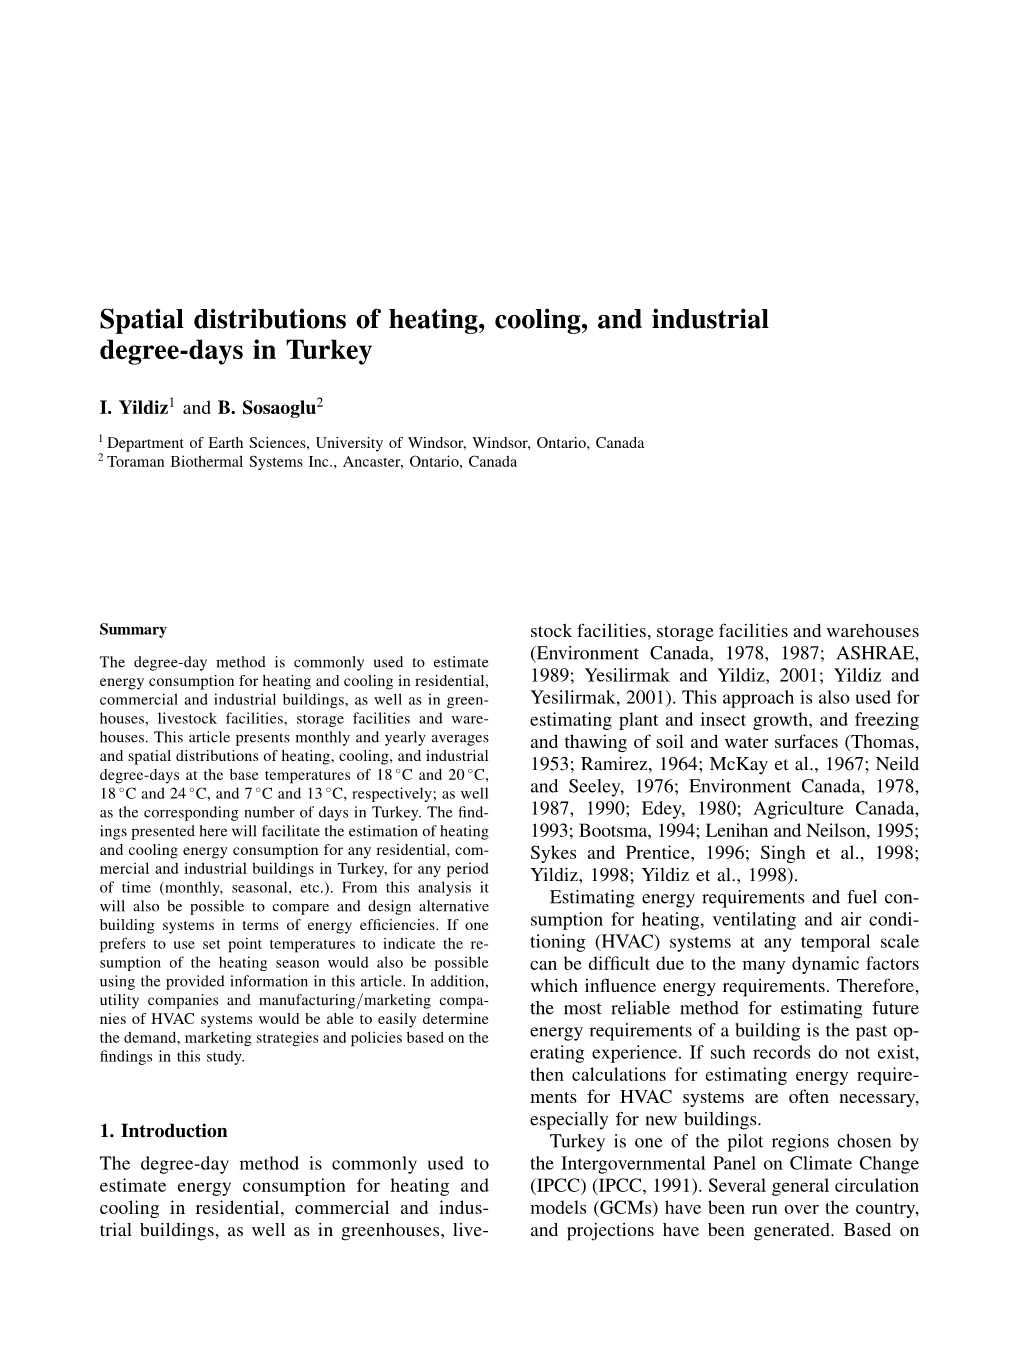 Spatial Distributions of Heating, Cooling, and Industrial Degree-Days in Turkey